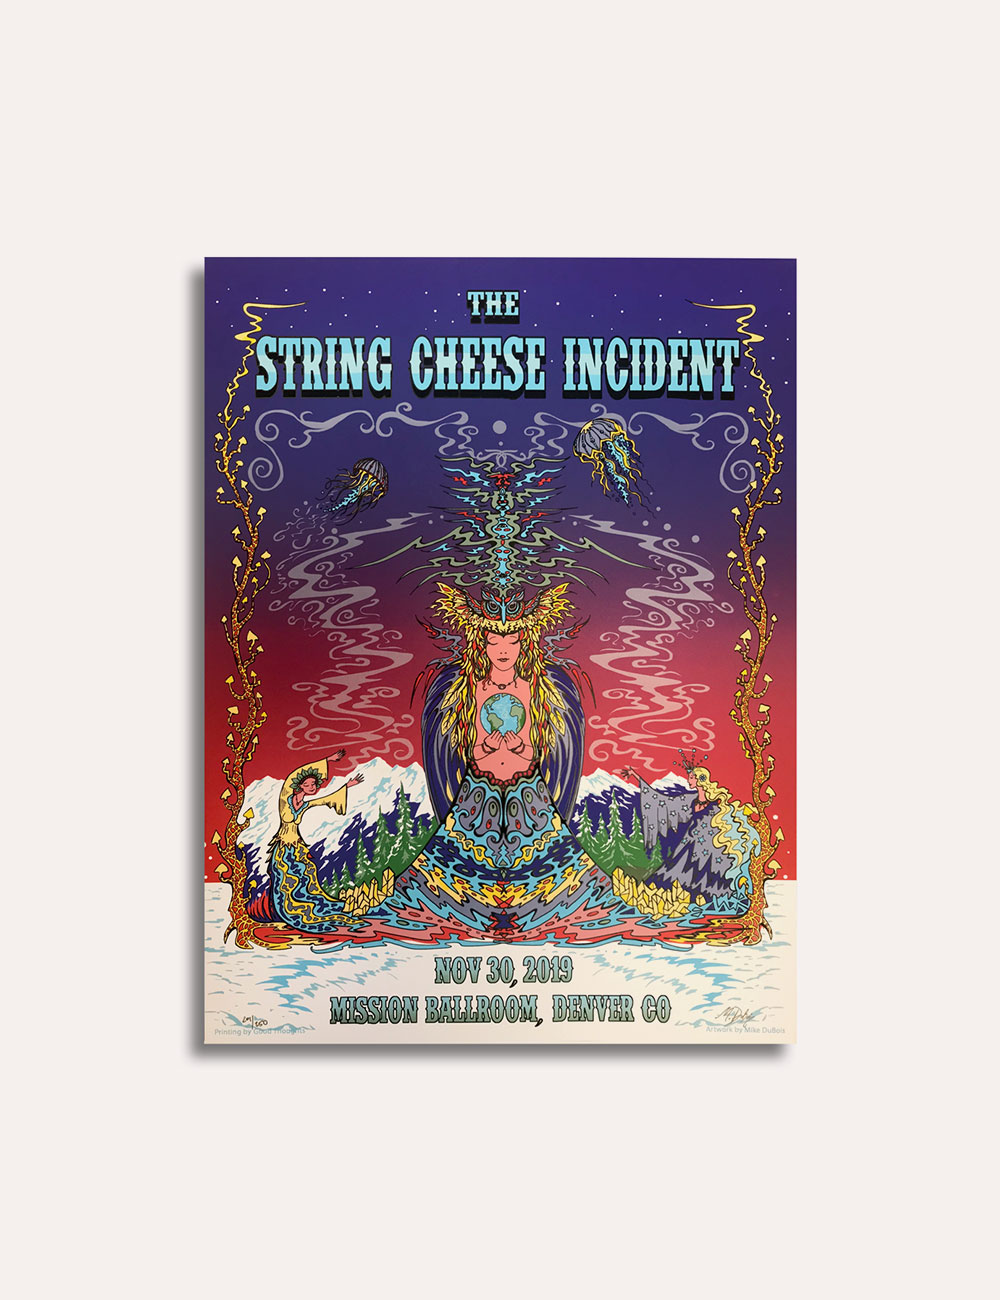 The String Cheese Incident - Merch - Poster - 2019 Mission Ballroom - Denver - November 30th